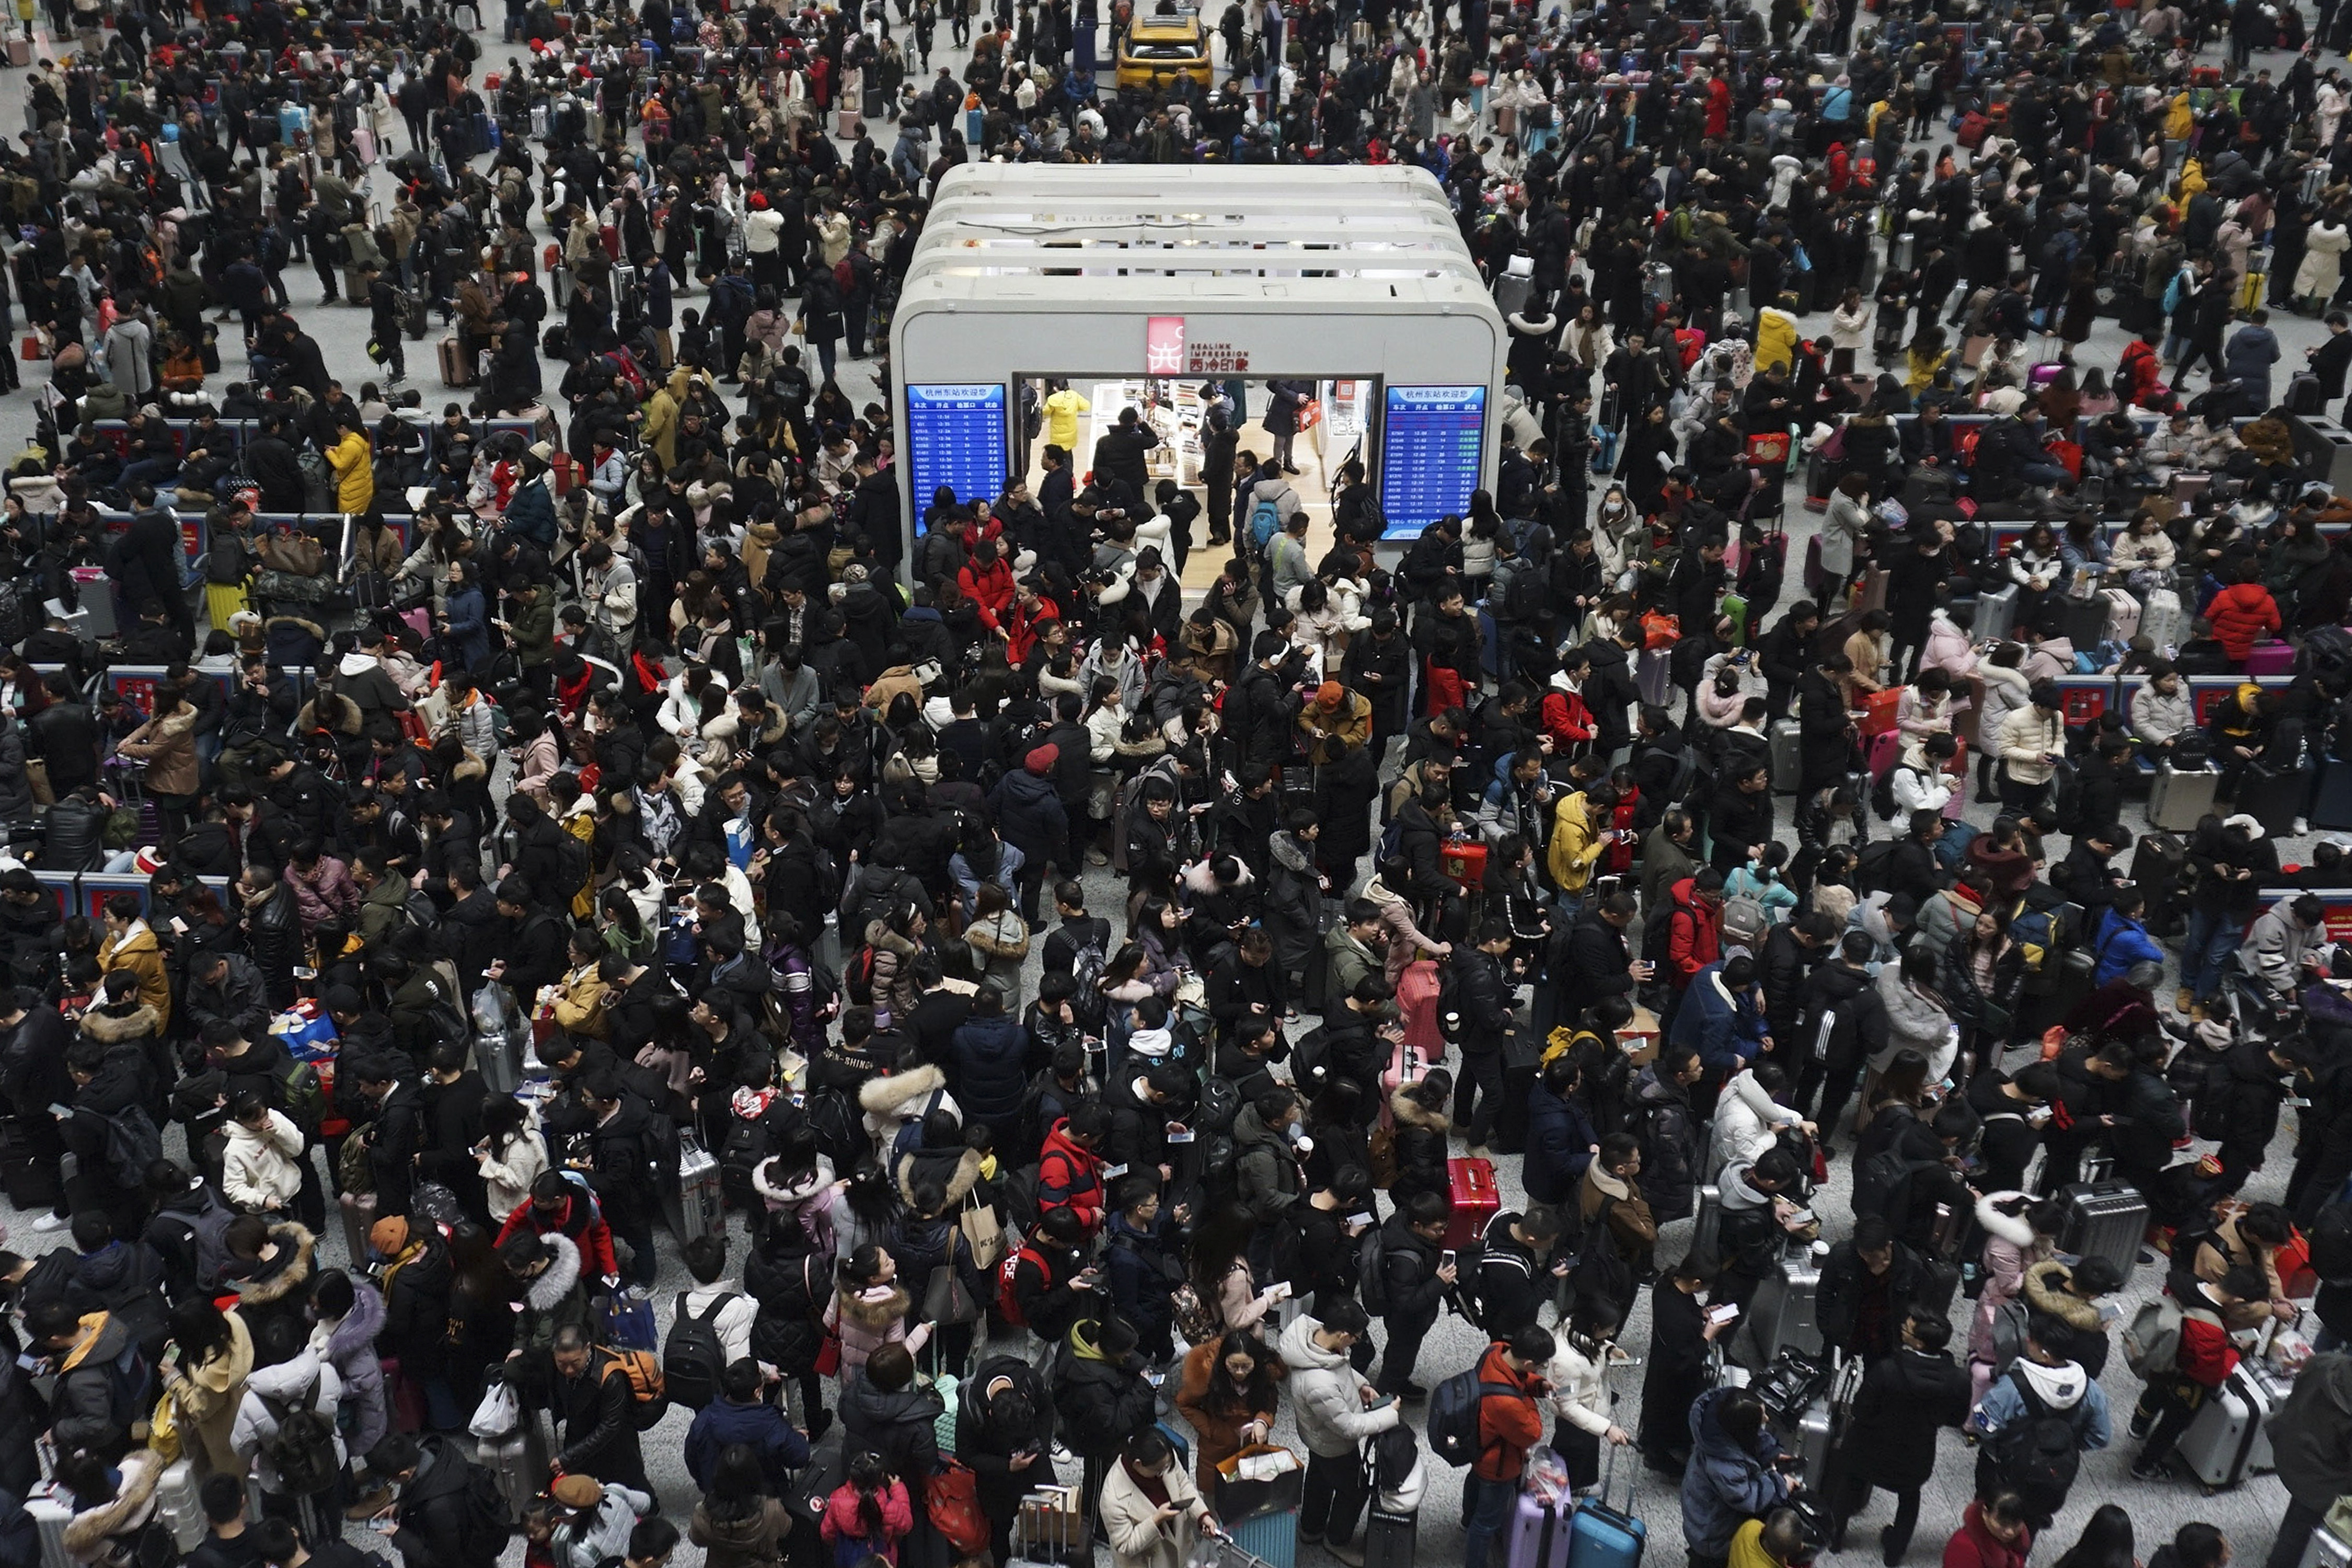 Chinese travelers wait for their trains at a railway station in Hangzhou in east China's Zhejiang province, Sunday, Feb. 10, 2019. Millions of Chinese are start returning to work after spending a weeklong Lunar New Year holiday with families in their hometown. (Chinatopix via AP)